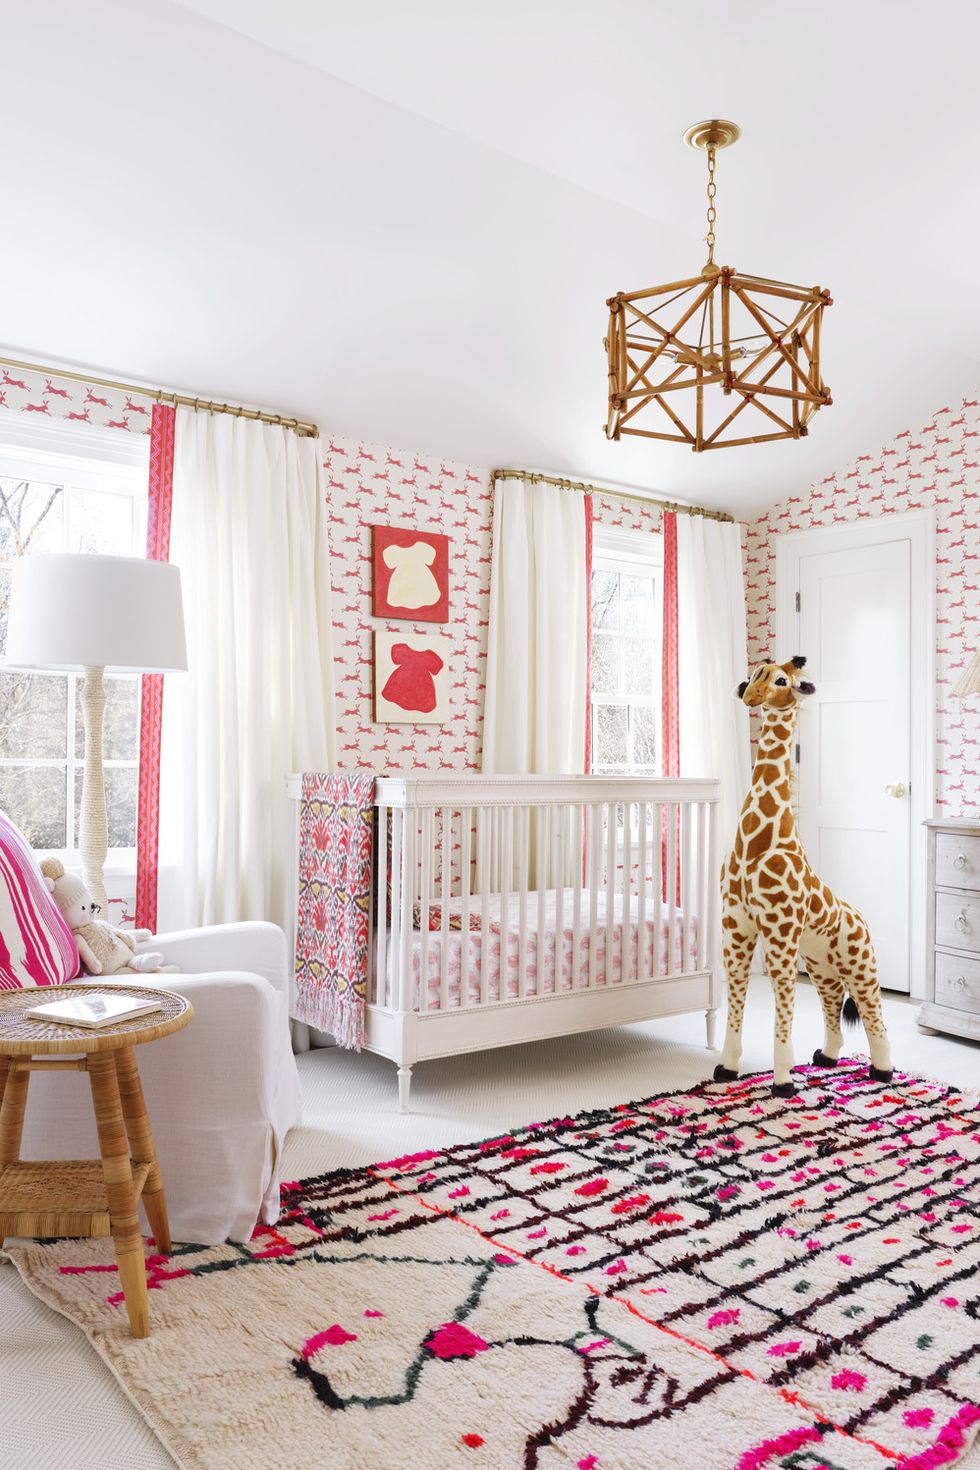 Girls-rooms Baby Girl's Closet Design Ideas - Page 18